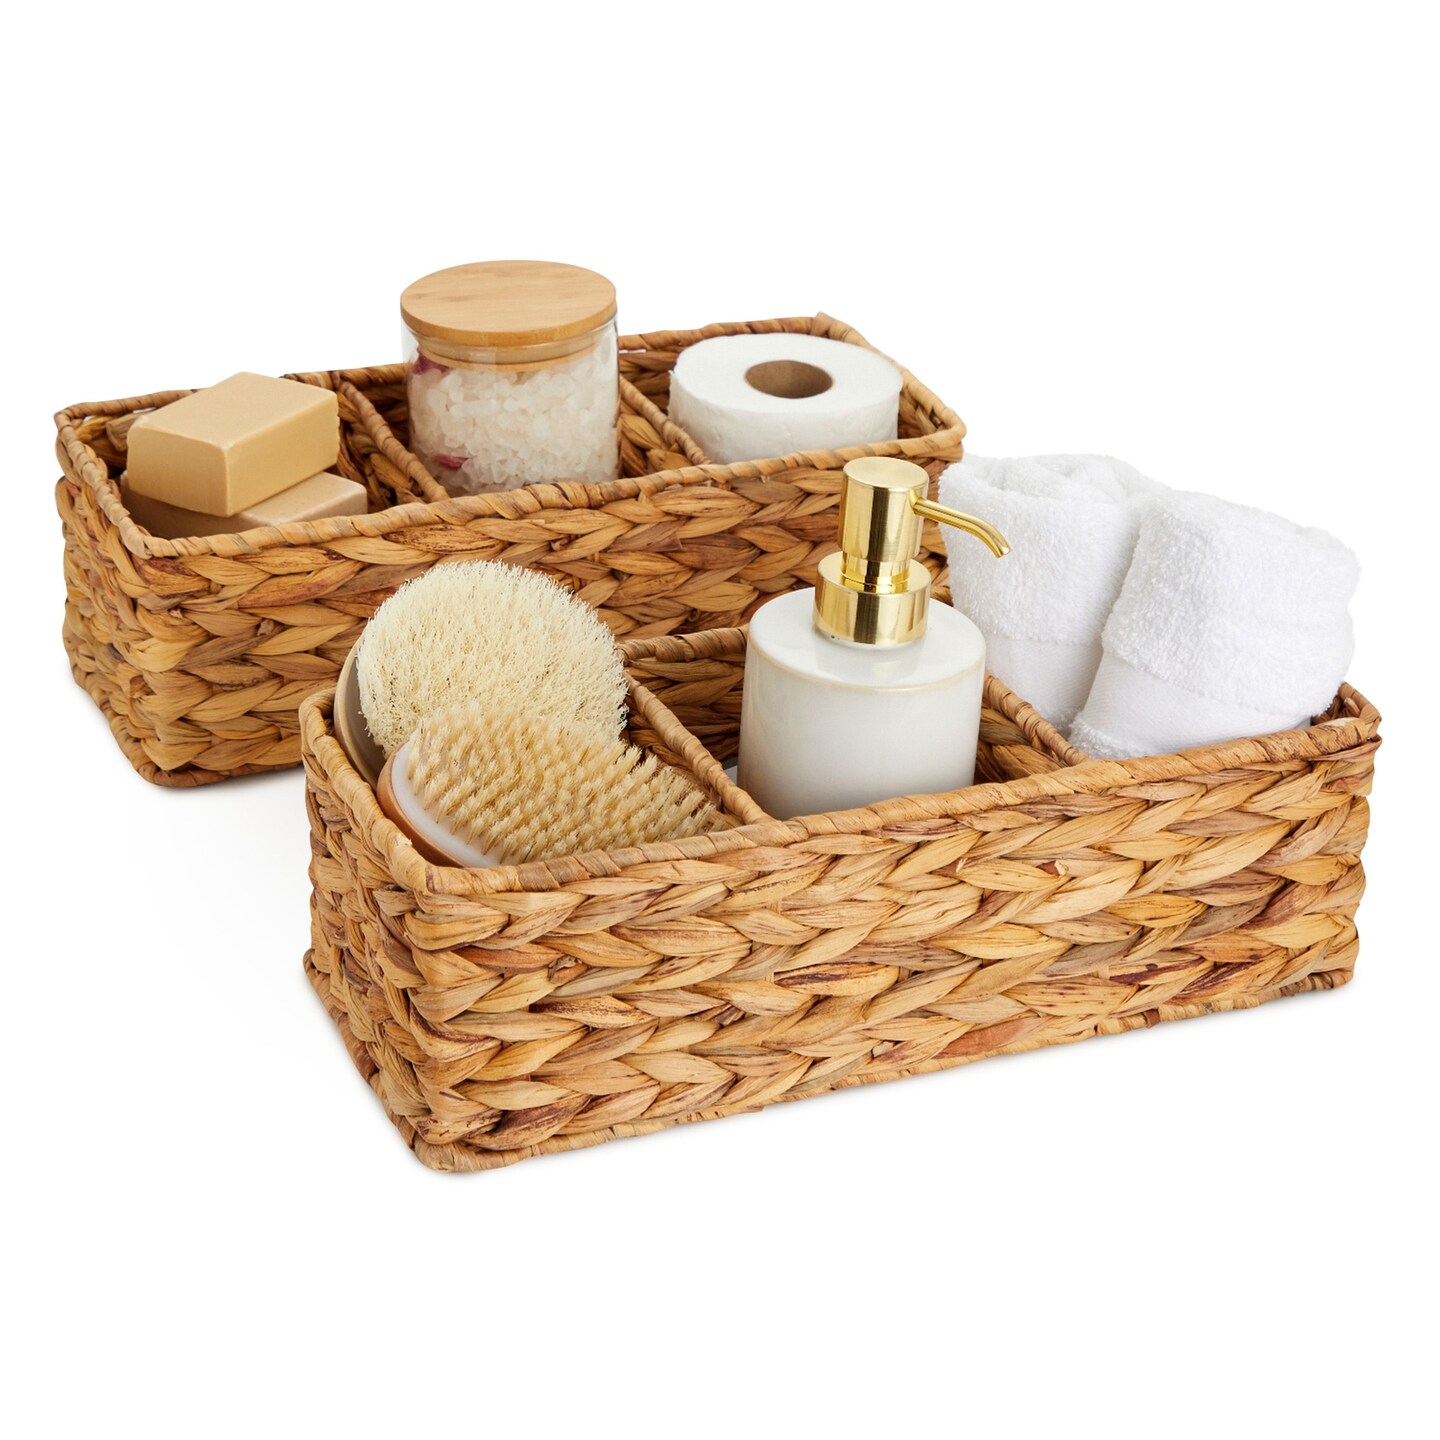 Wicker Baskets with Liner for Storage, 2 Pack Decorative Woven Storage  Baskets for Organizing, Toilet Paper Basket Storage, Bathroom Storage Bins